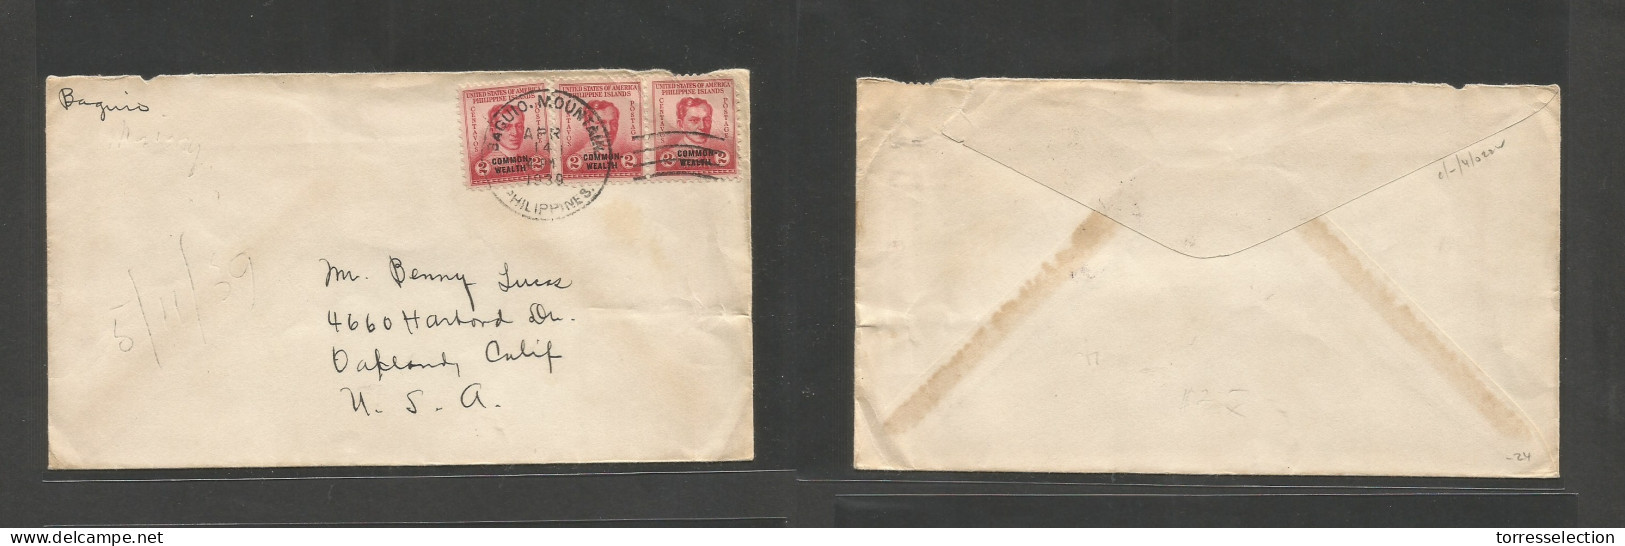 PHILIPPINES. 1939 (14 Apr) Baguio Mountains - USA, Oakland. Multifkd Env At 6c Rate, Rolling Cds. VF Origin. - Philippines